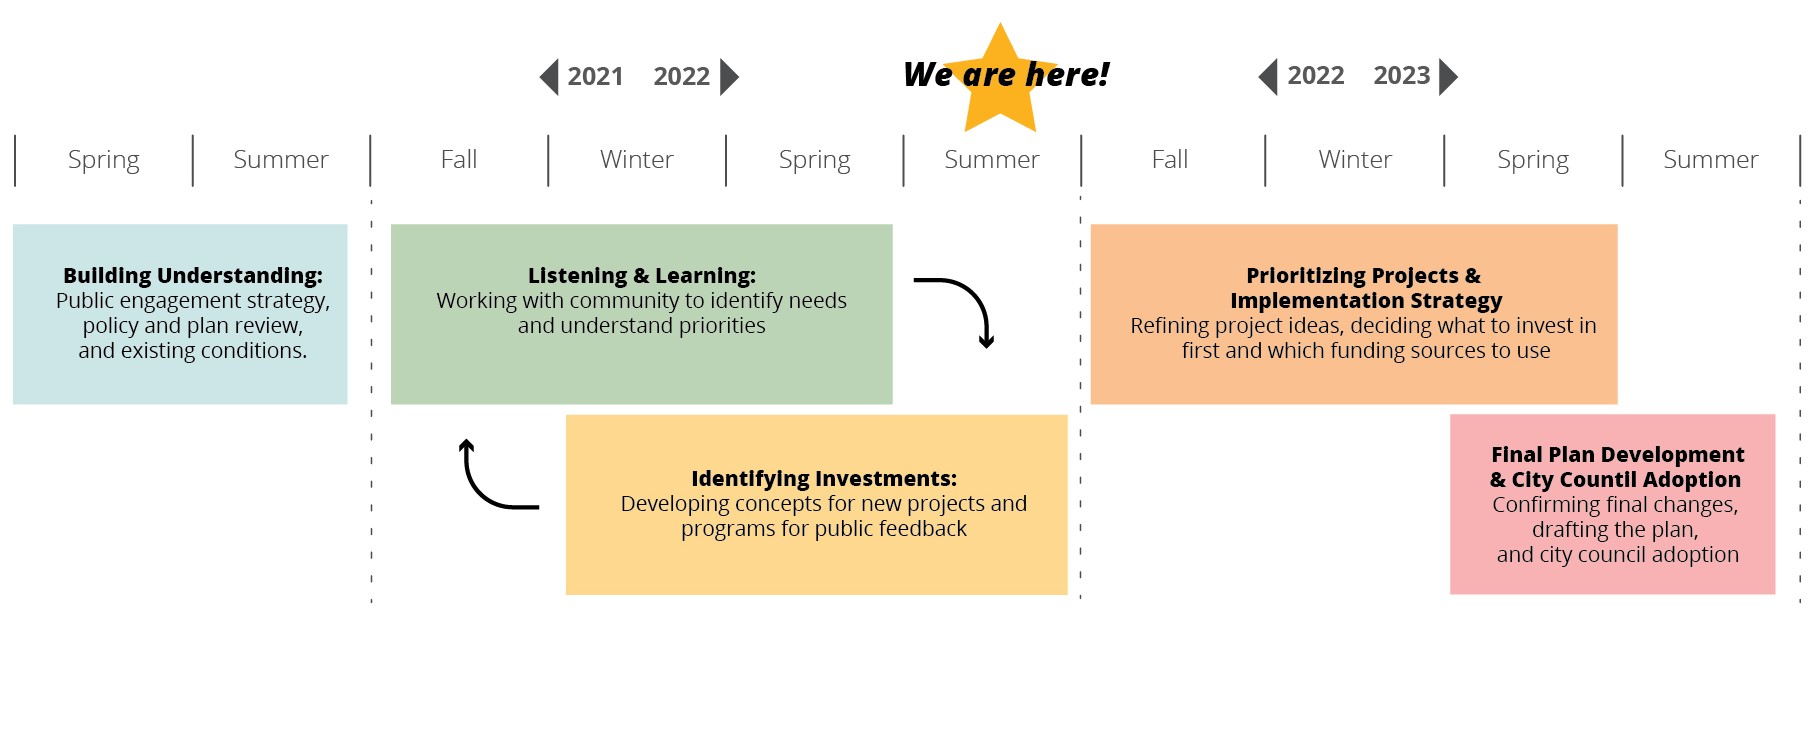 Timeline|Spring/Summer 2021: Building Understanding. Fall 2021 through Summer 2022: Listening and learning, identifying investments. Fall/Winter 2022: Draft Plan and Implementation Strategy. Spring/Summer 2023: Final Plan Revisions and City Council Adoption.